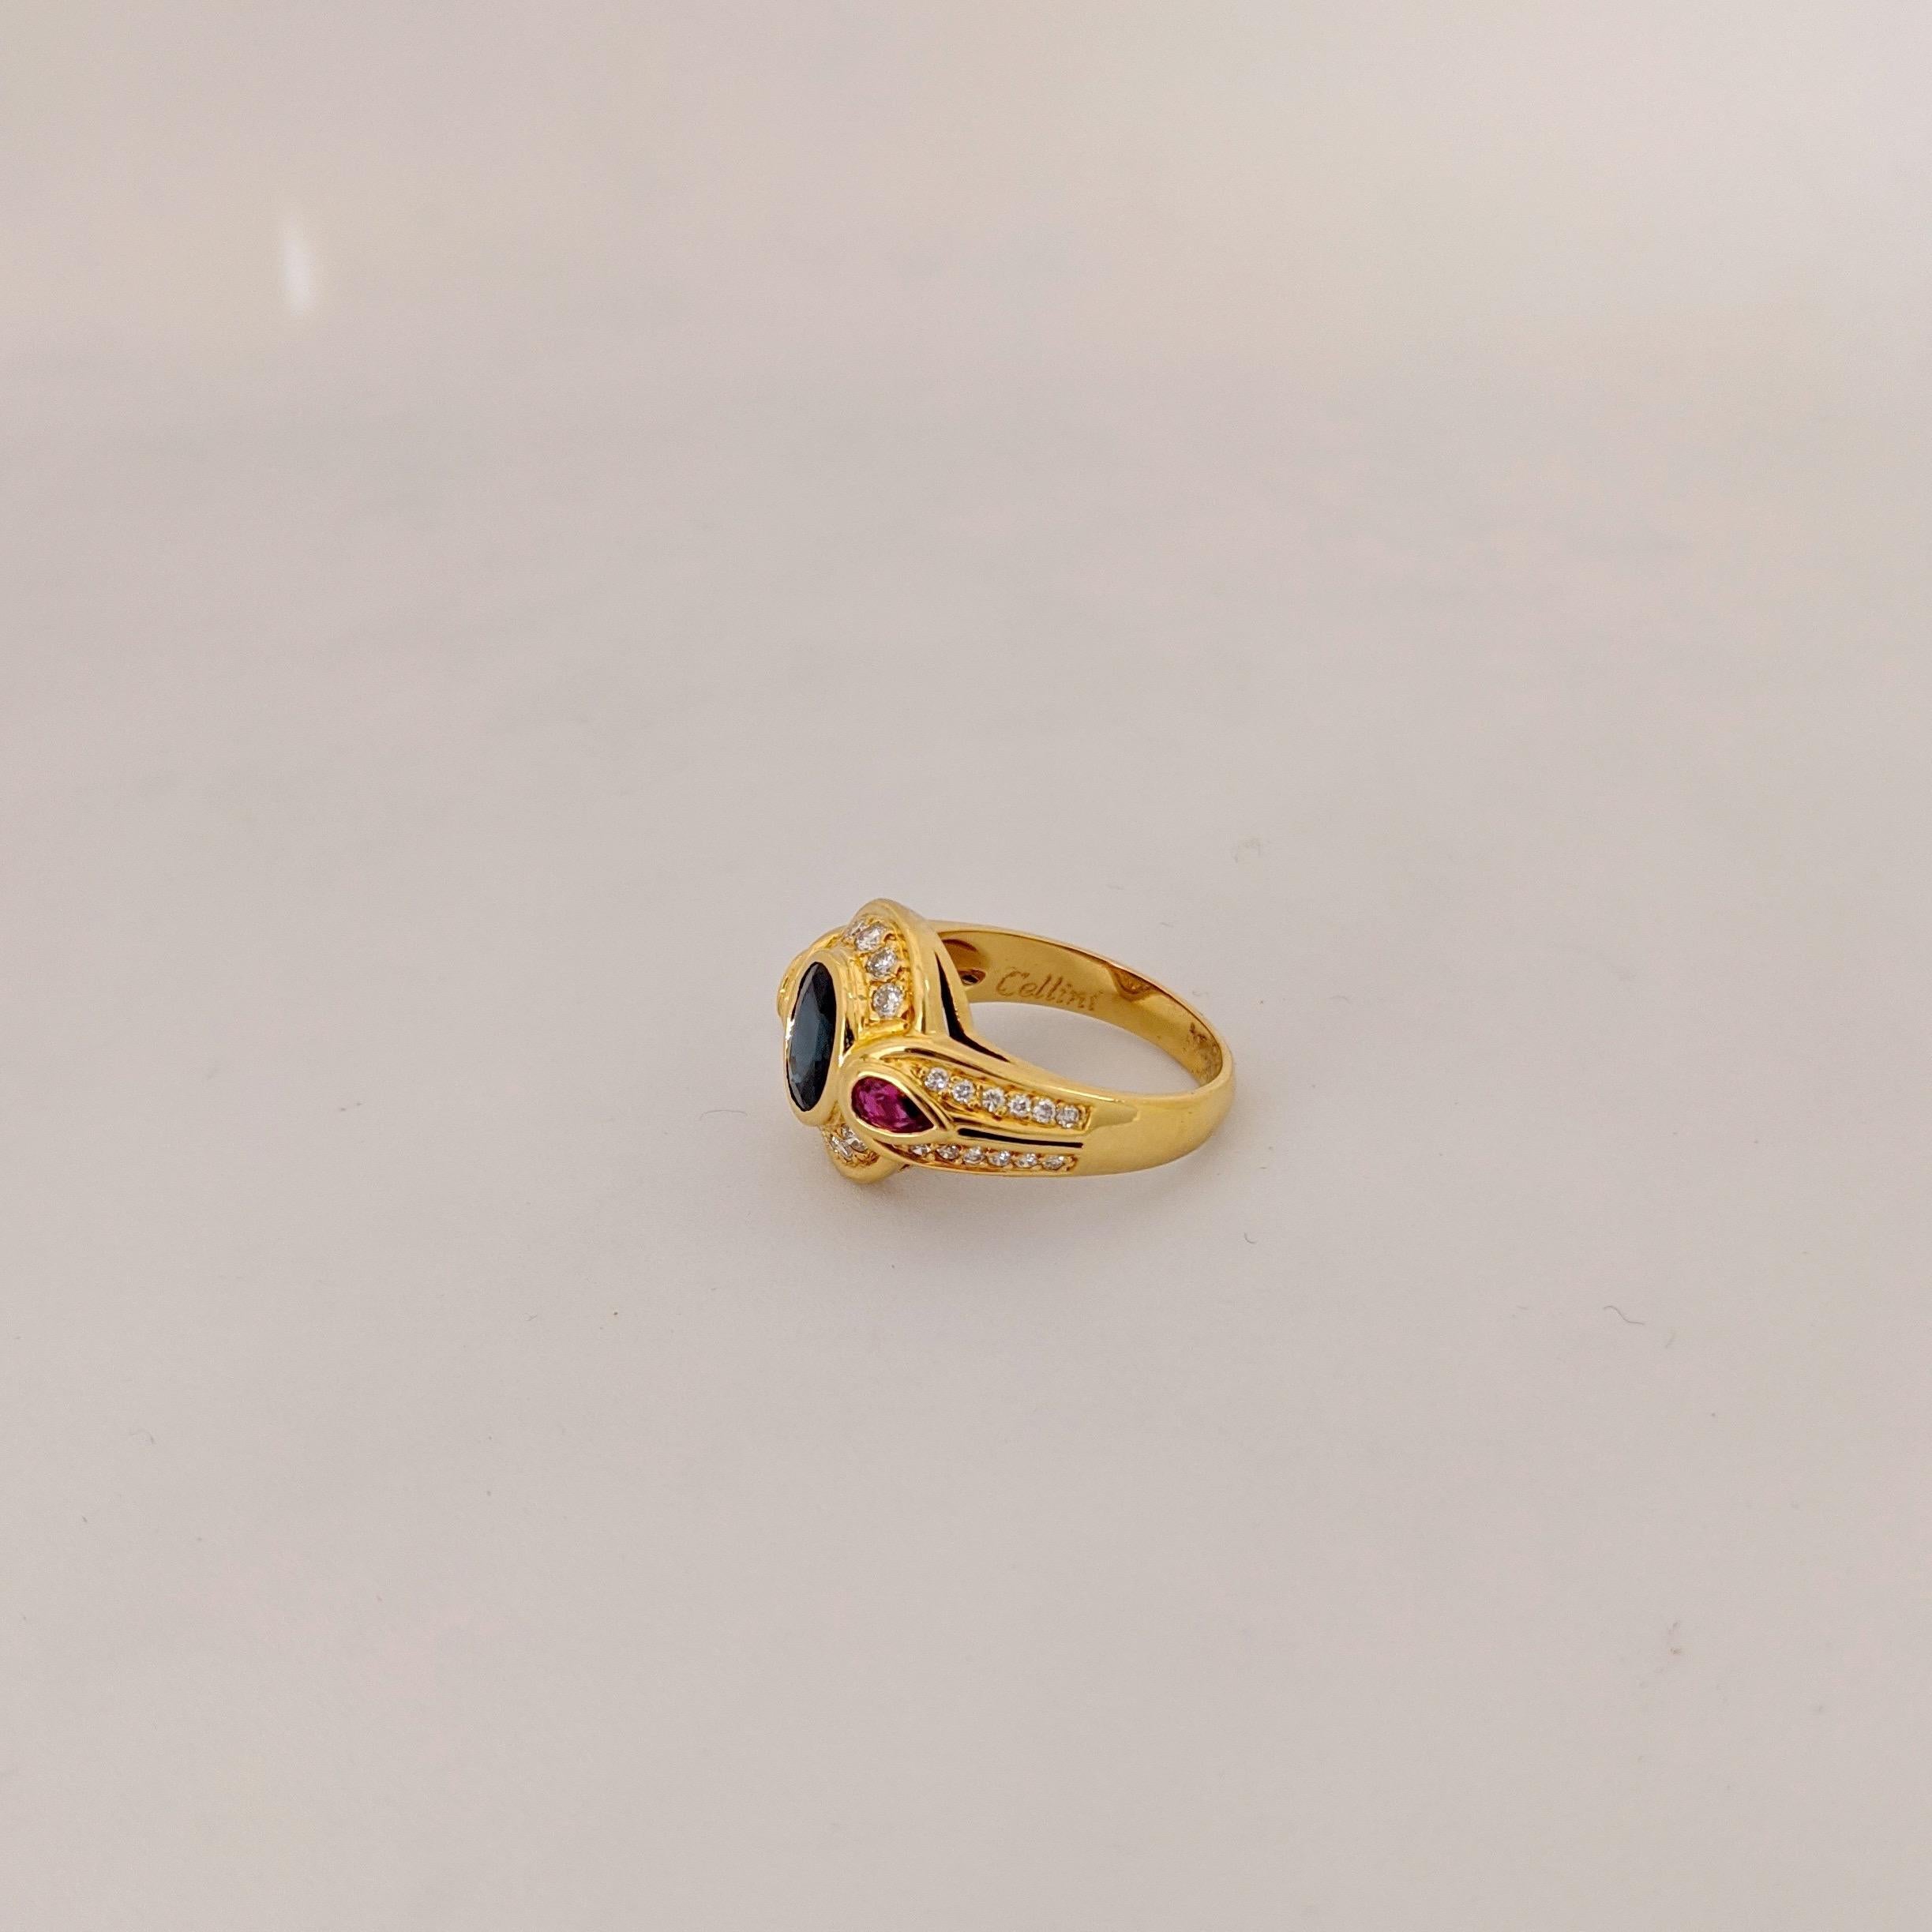 CarreraYCarrera 18kt Gold Ring with 1.65Ct Oval Blue Sapphire, Ruby and Diamonds 3